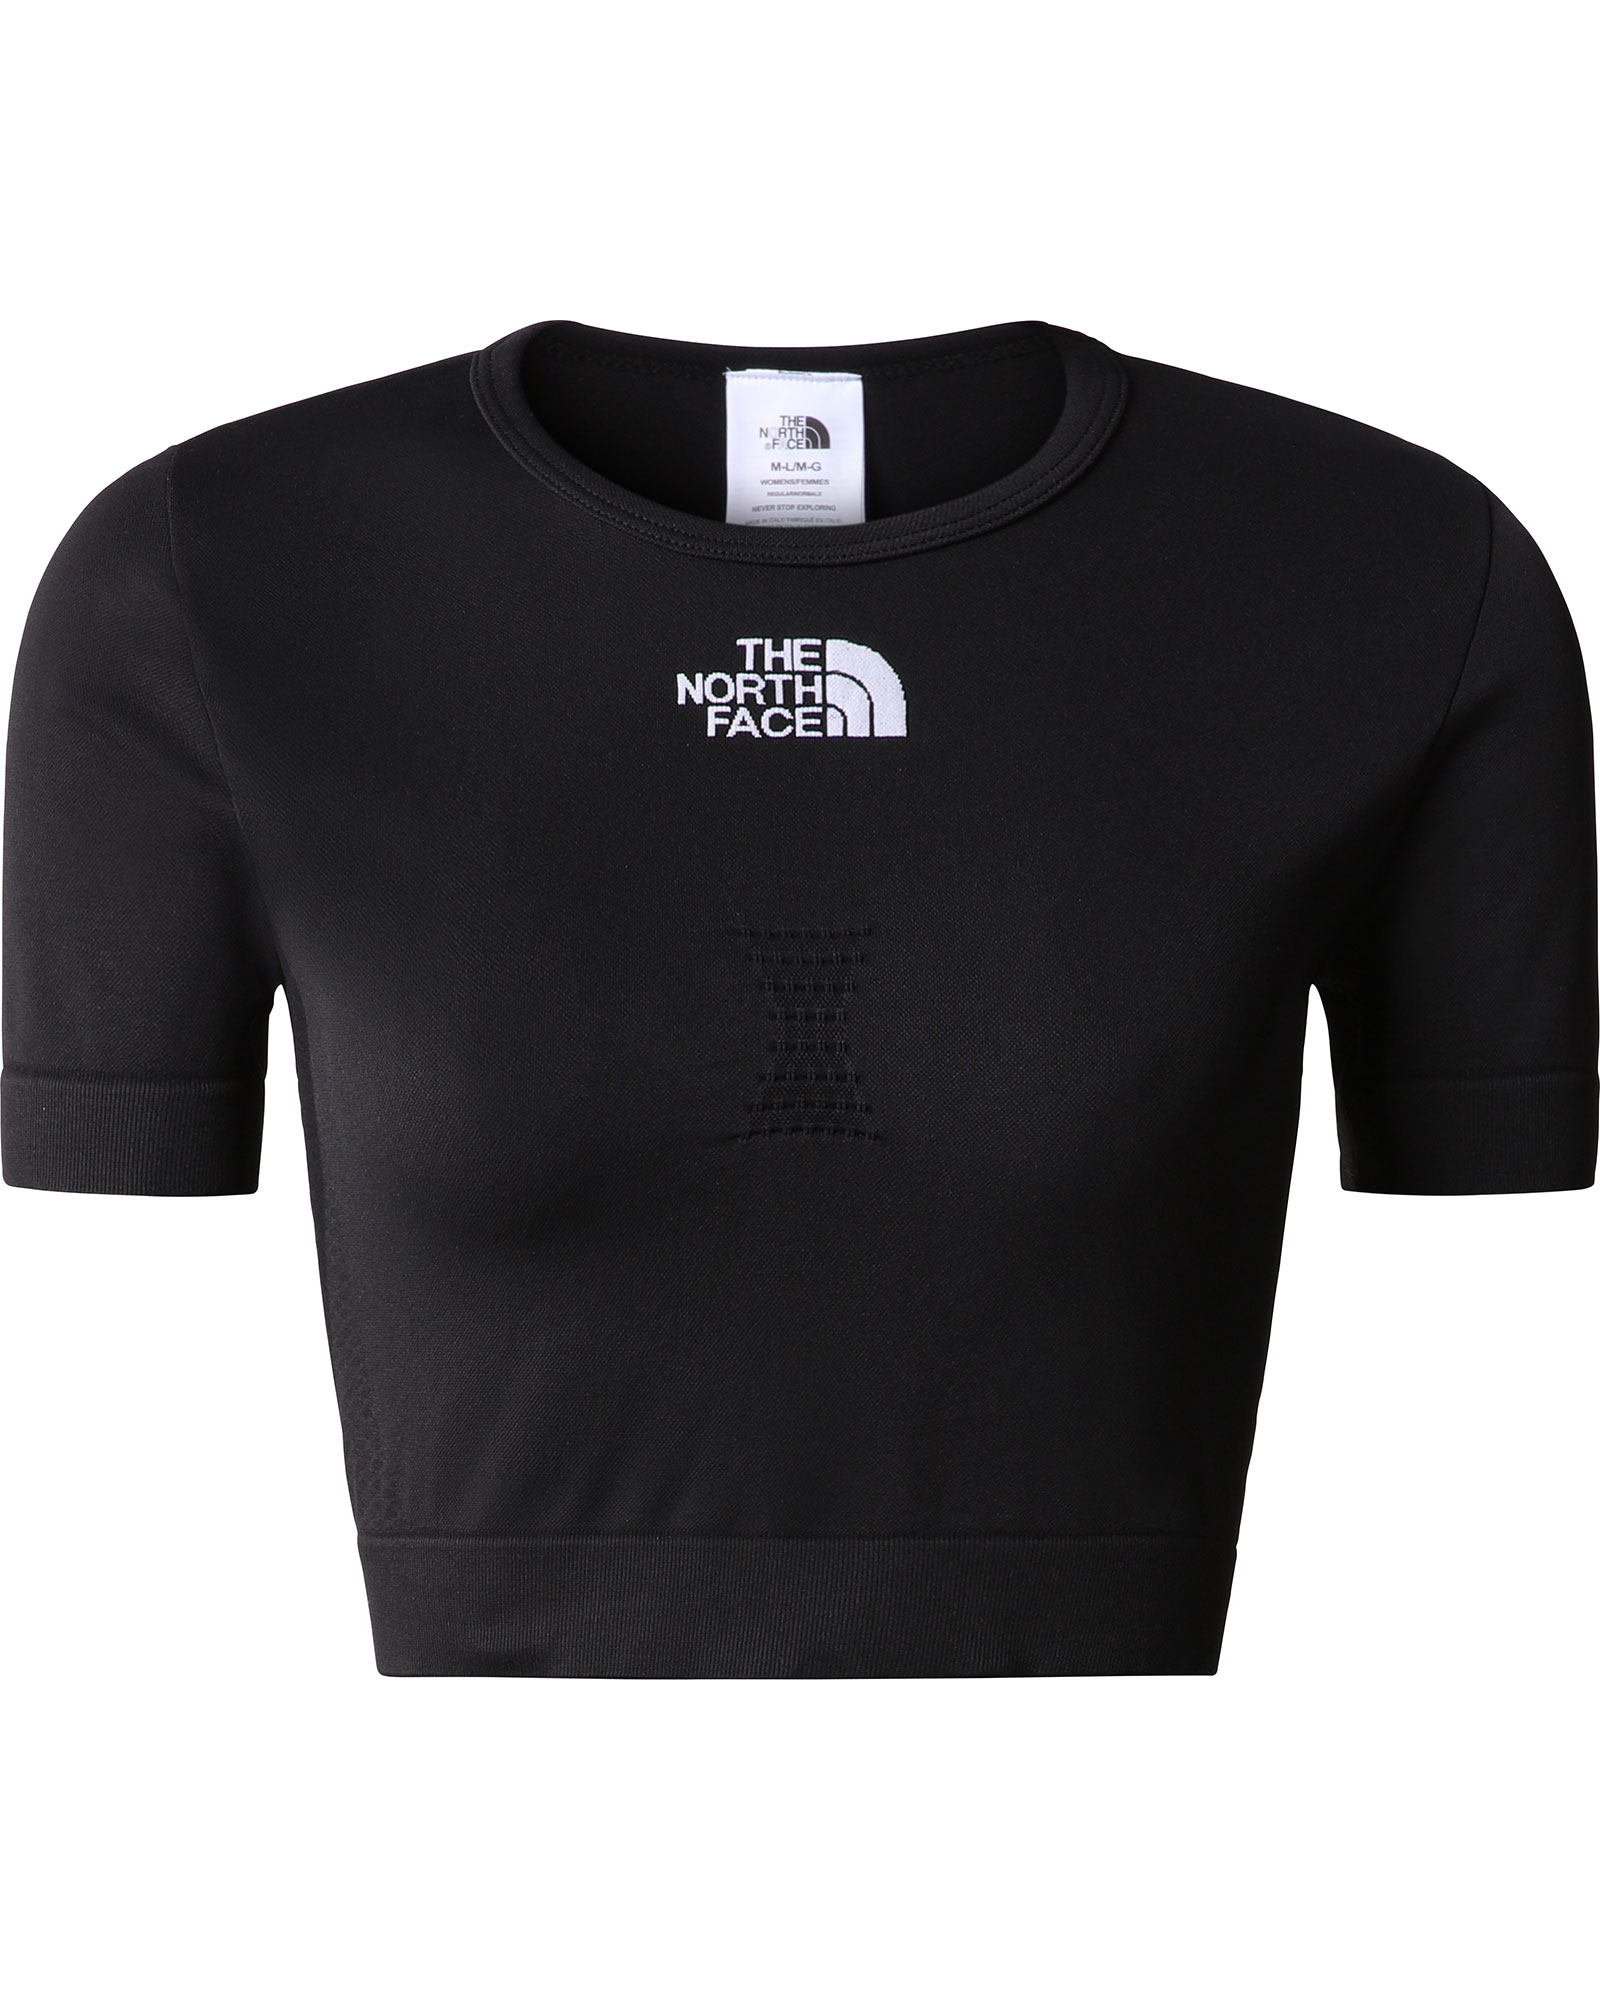 The North Face Women’s New Seamless T-Shirt 0